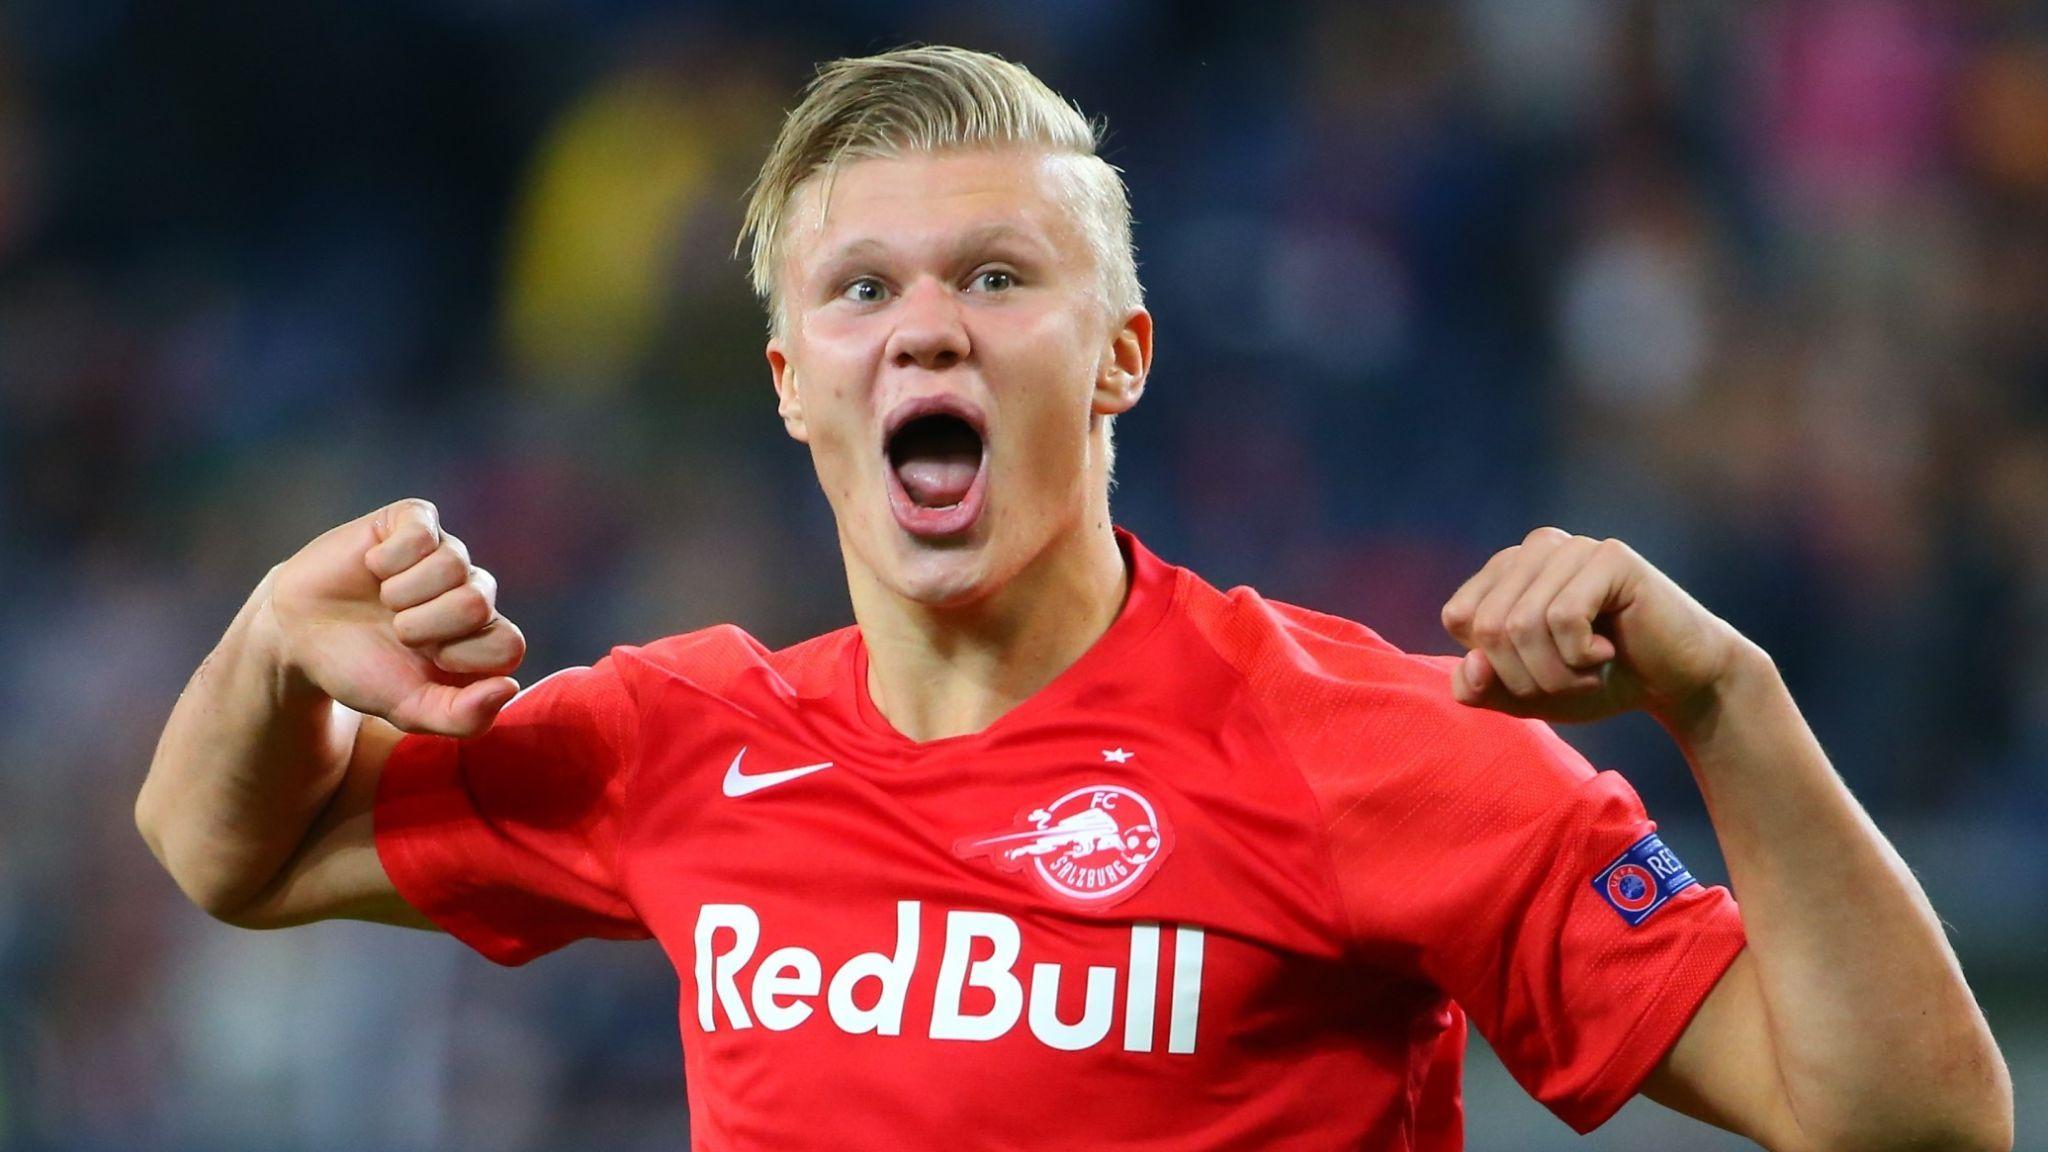 Erling Haaland signs for Borussia Dortmund from Red Bull Salzburg